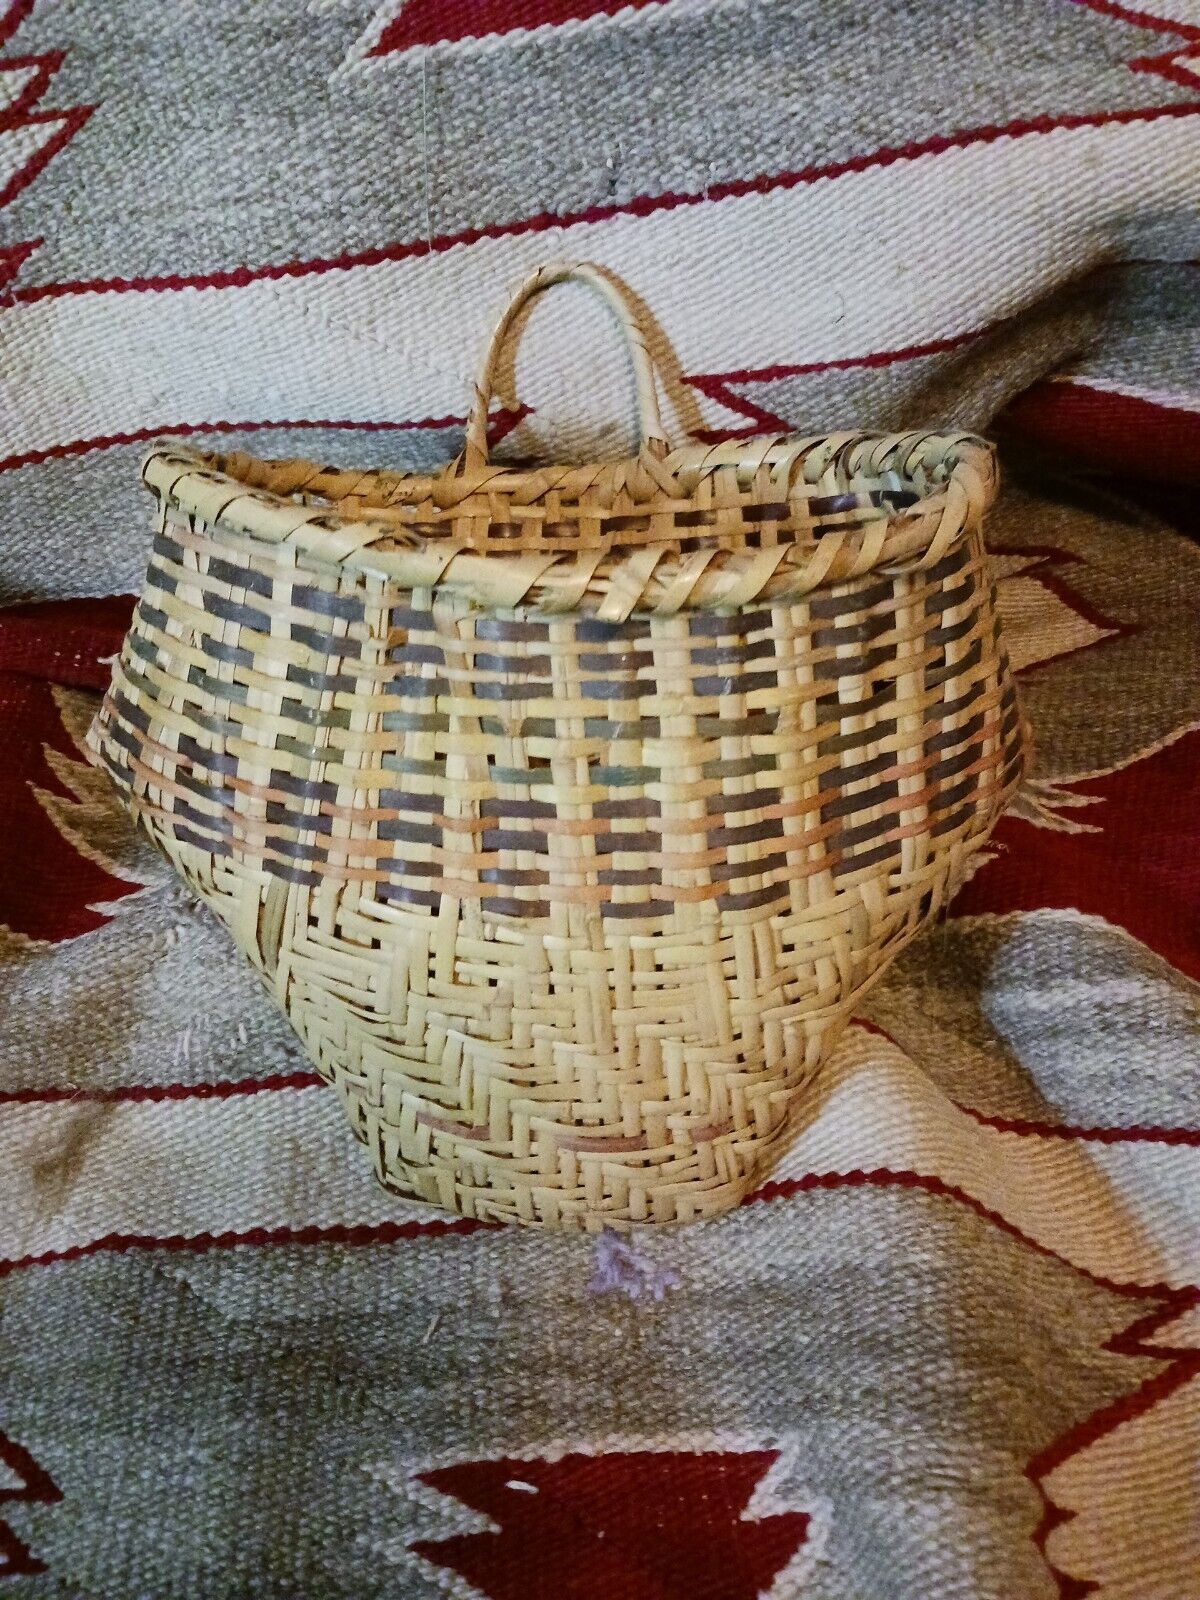 **MAGNIFICENT EARLY 1900s CHOCTAW RIVER CANE BASKET  VERY NICE NATURAL DYES *